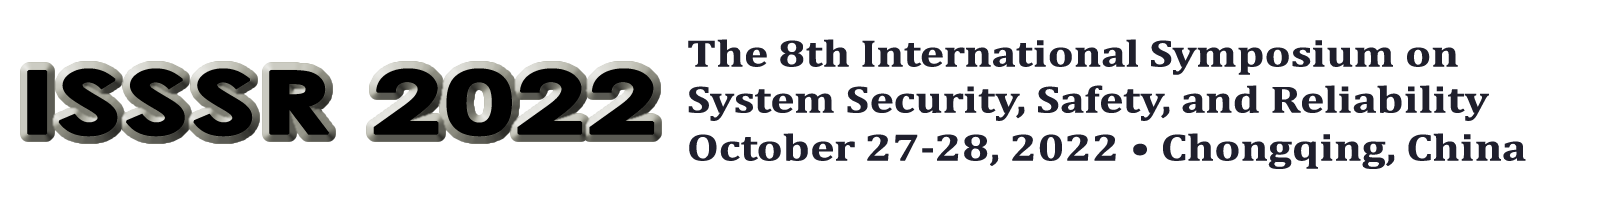 ISSSR 2022 September 19-20, 2022 in Chongqing, China. The 8th International Symposium on System and Software Reliability.